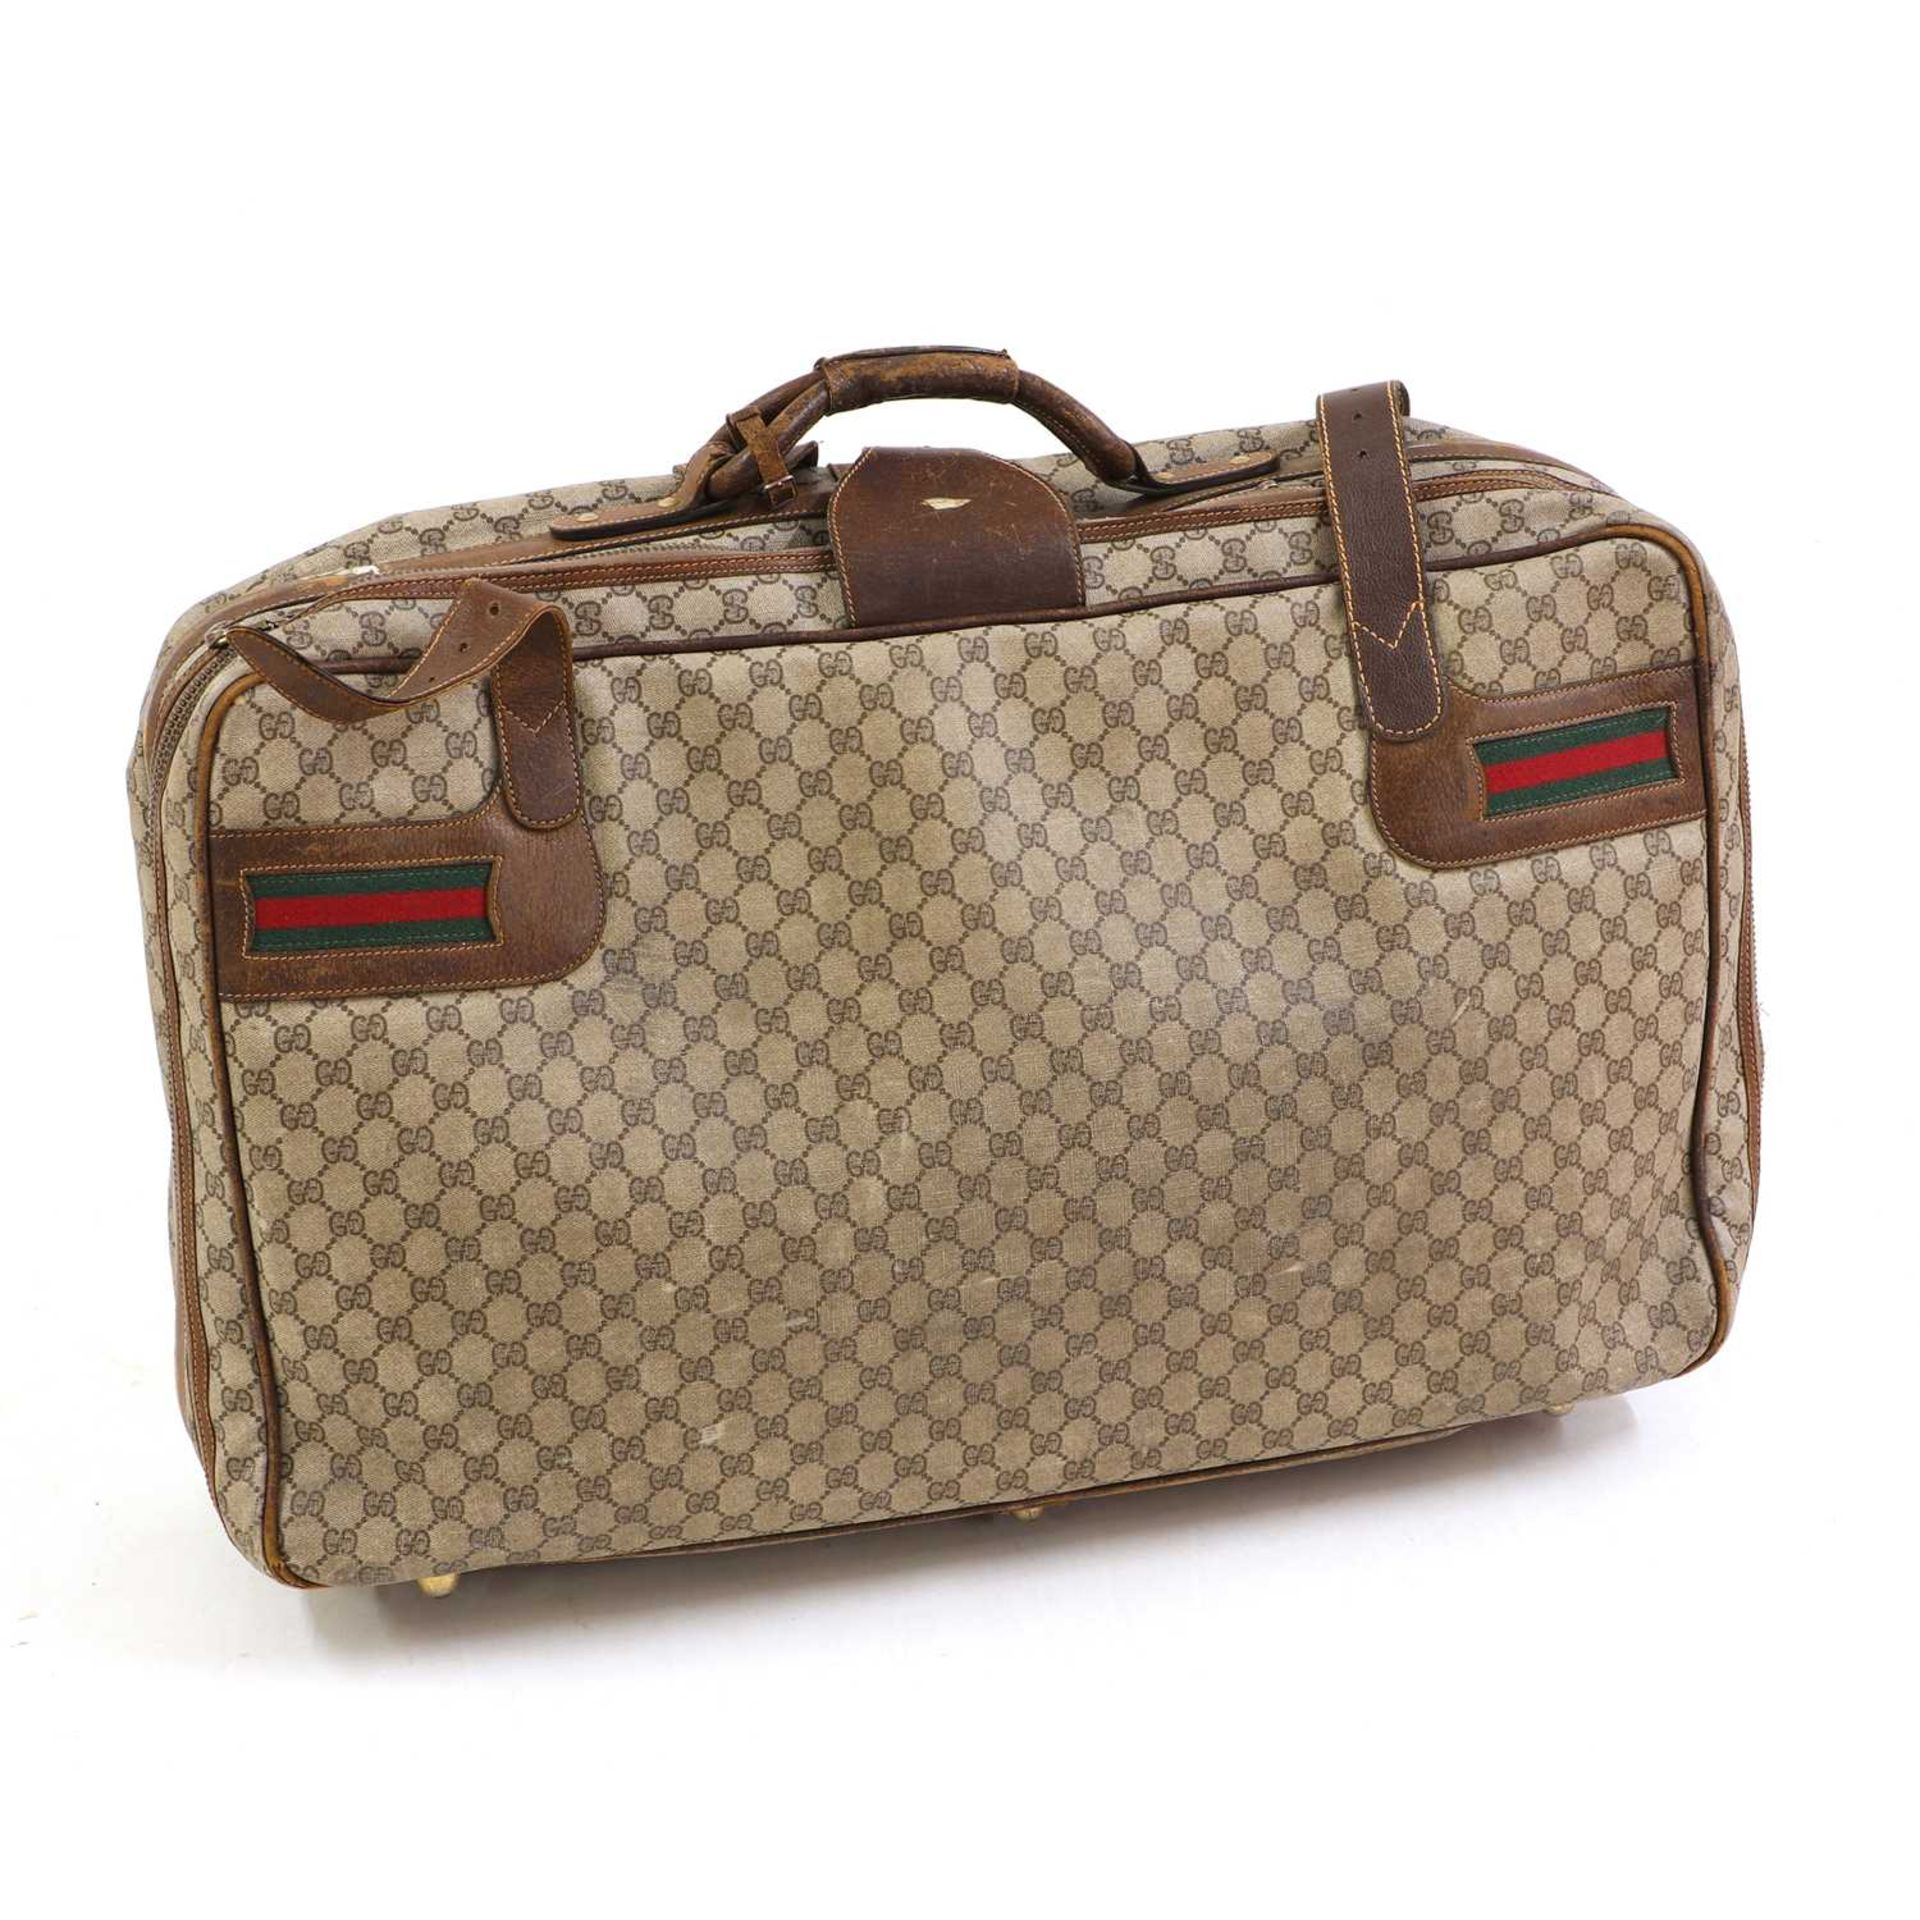 A Vintage Gucci soft-sided suitcase,